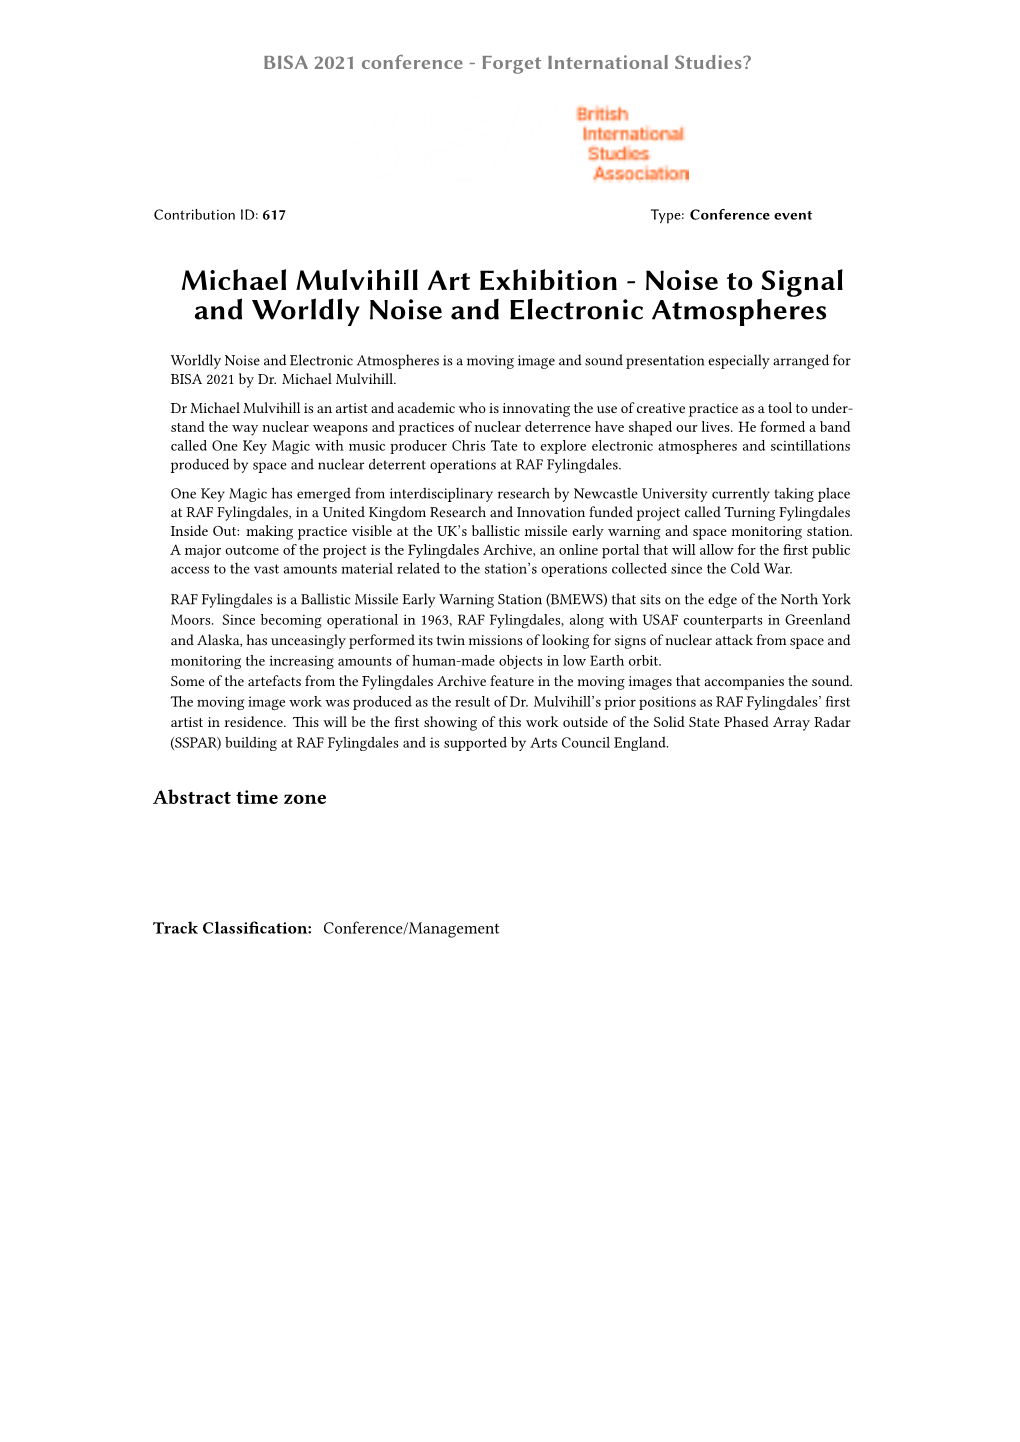 Michael Mulvihill Art Exhibition - Noise to Signal and Worldly Noise and Electronic Atmospheres